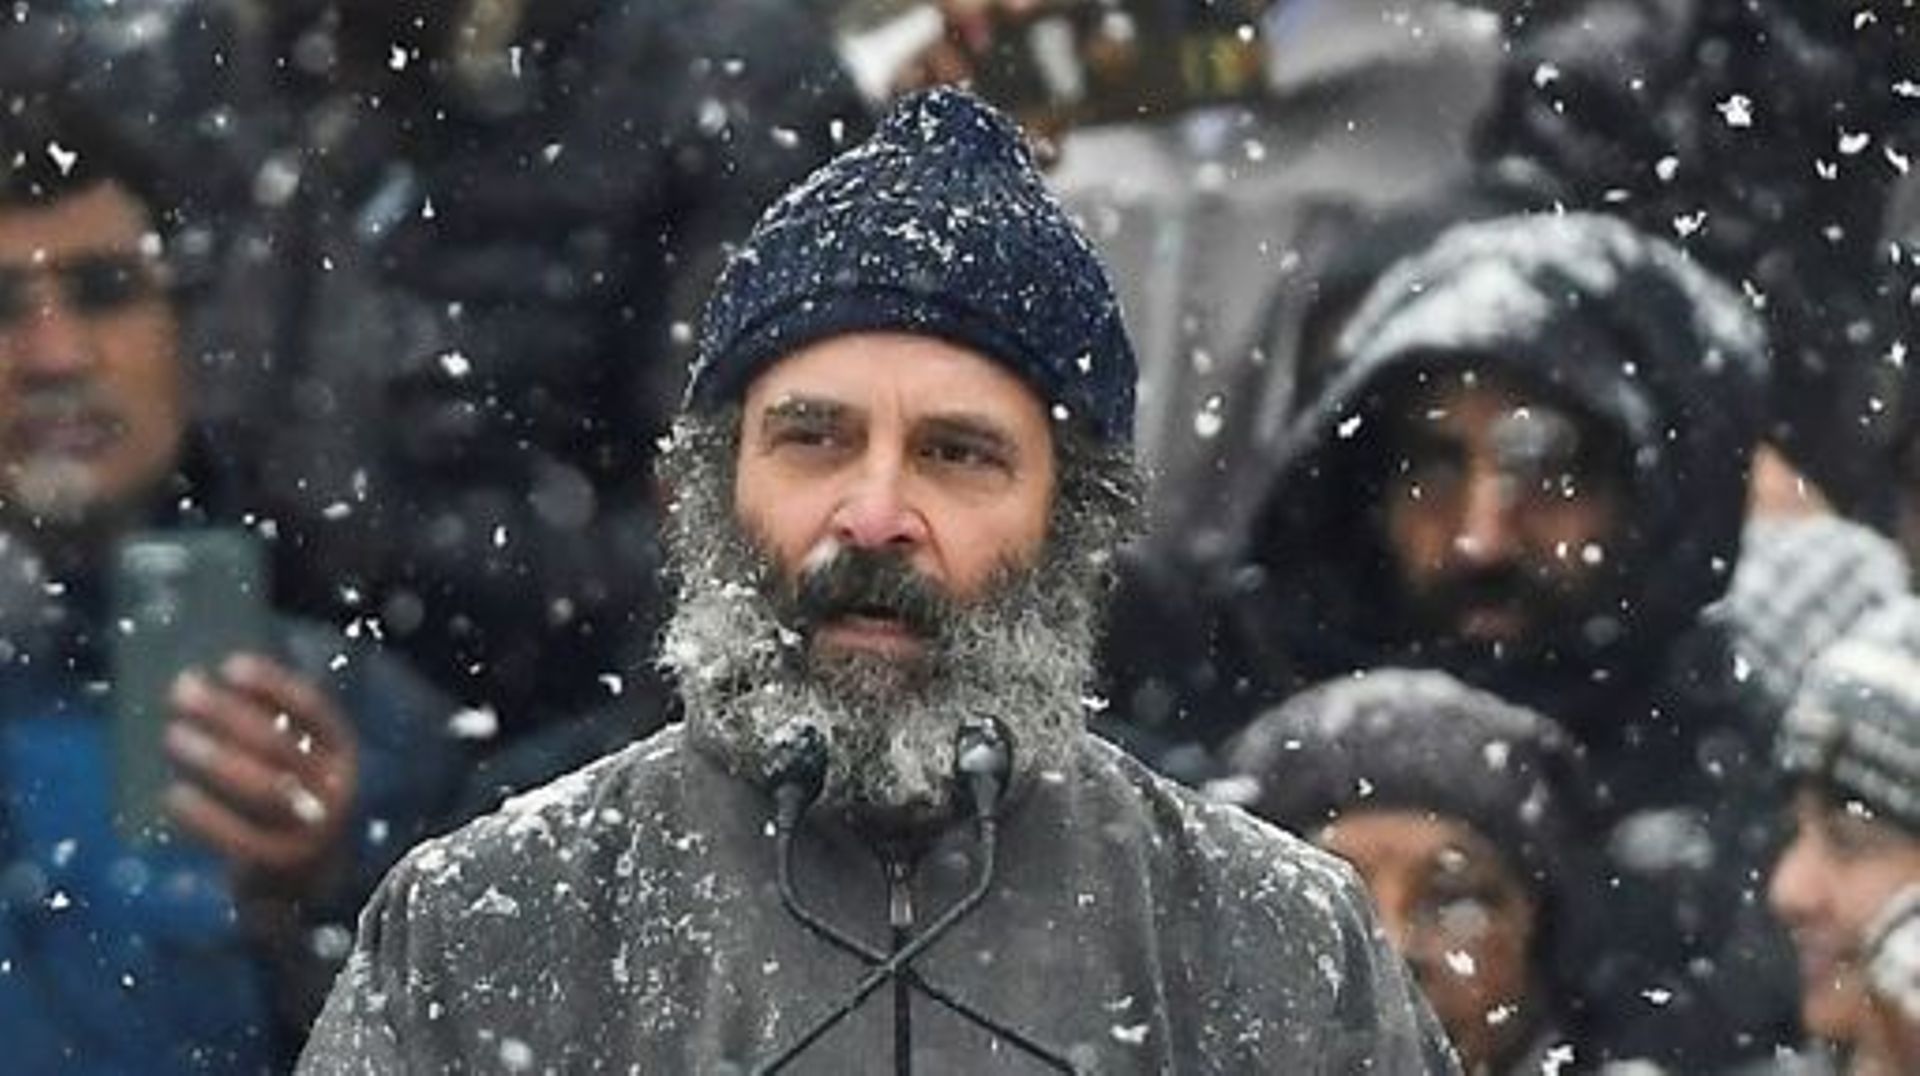 India’s Congress party leader Rahul Gandhi speaks at a public meeting amid heavy snowfall as he concludes the 'Bharat Jodo Yatra' march in Srinagar on January 30, 2023. TAUSEEF MUSTAFA / AFP